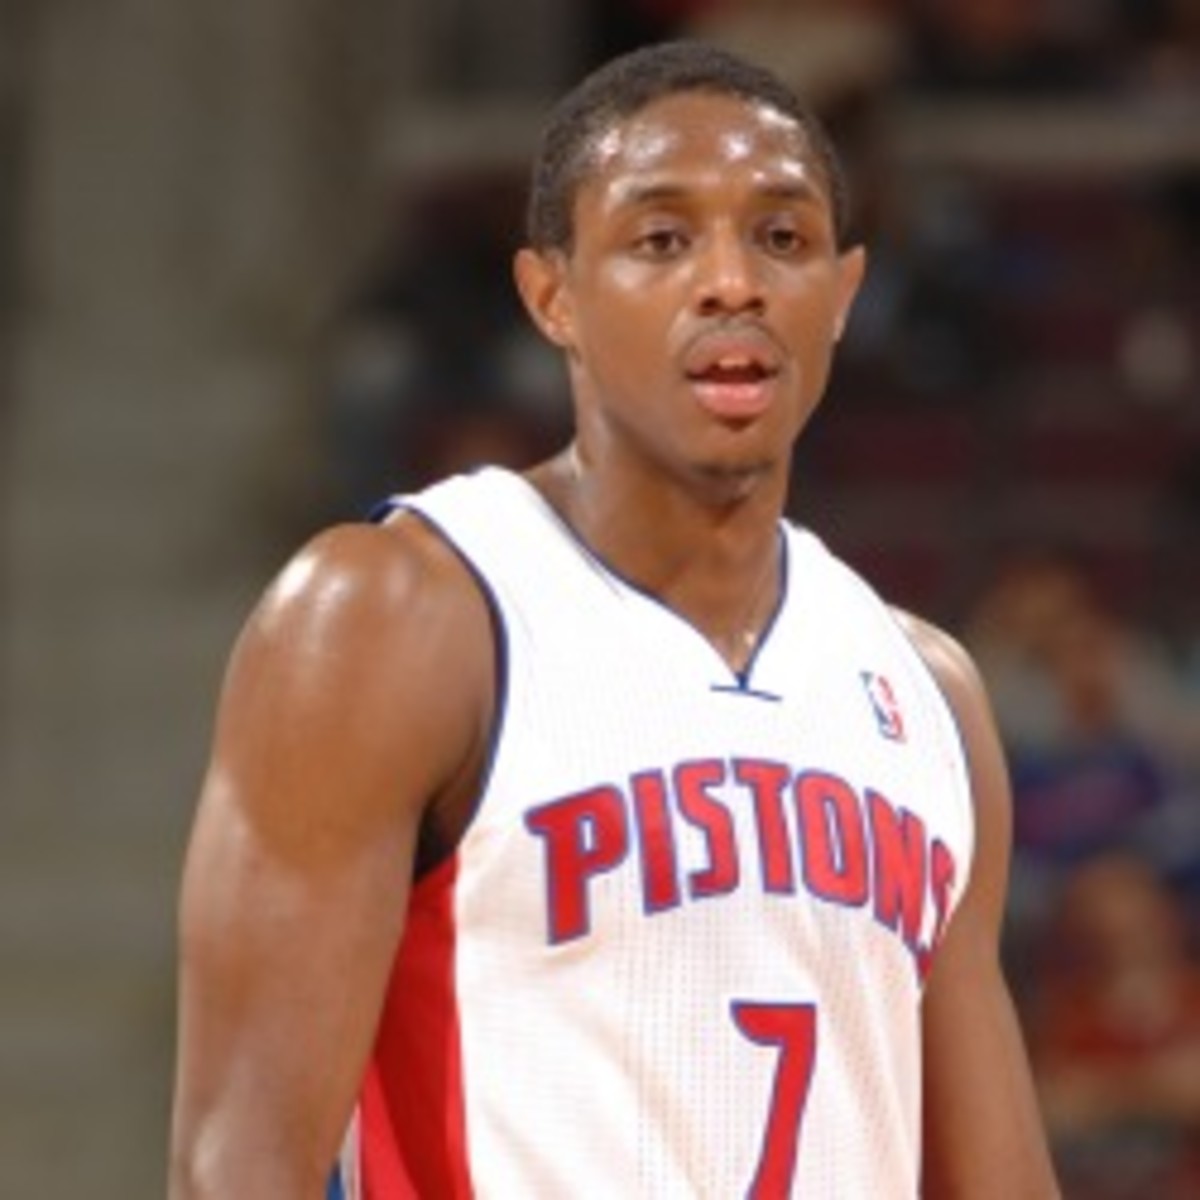 Pistons guard Brandon Knight is among several athletes alleged to buy fraudulent promissory notes from Success Trade.  (B. Sevald/Einstein/NBA/Getty Images)